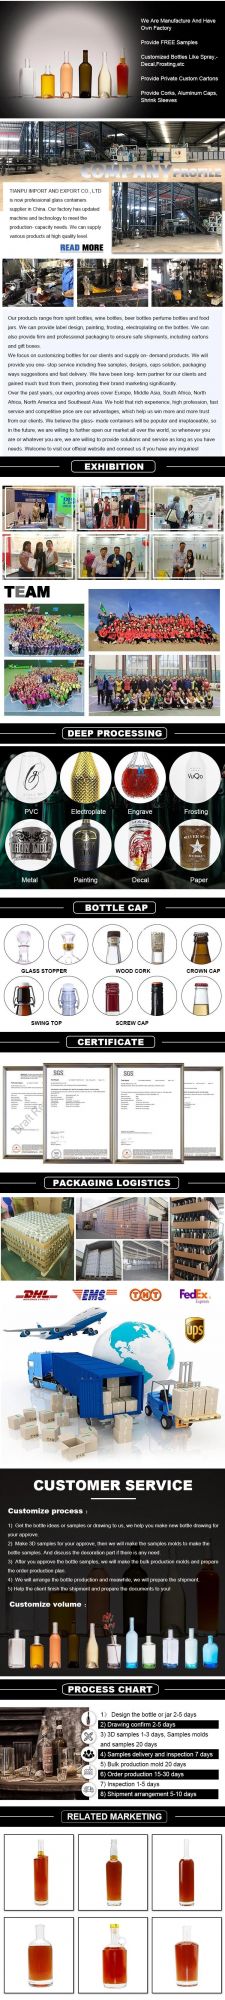 50ml 100ml Clear Flat Flask Glass Bottles for Beverage Packing Cold Brew Coffee Whisky Liquor